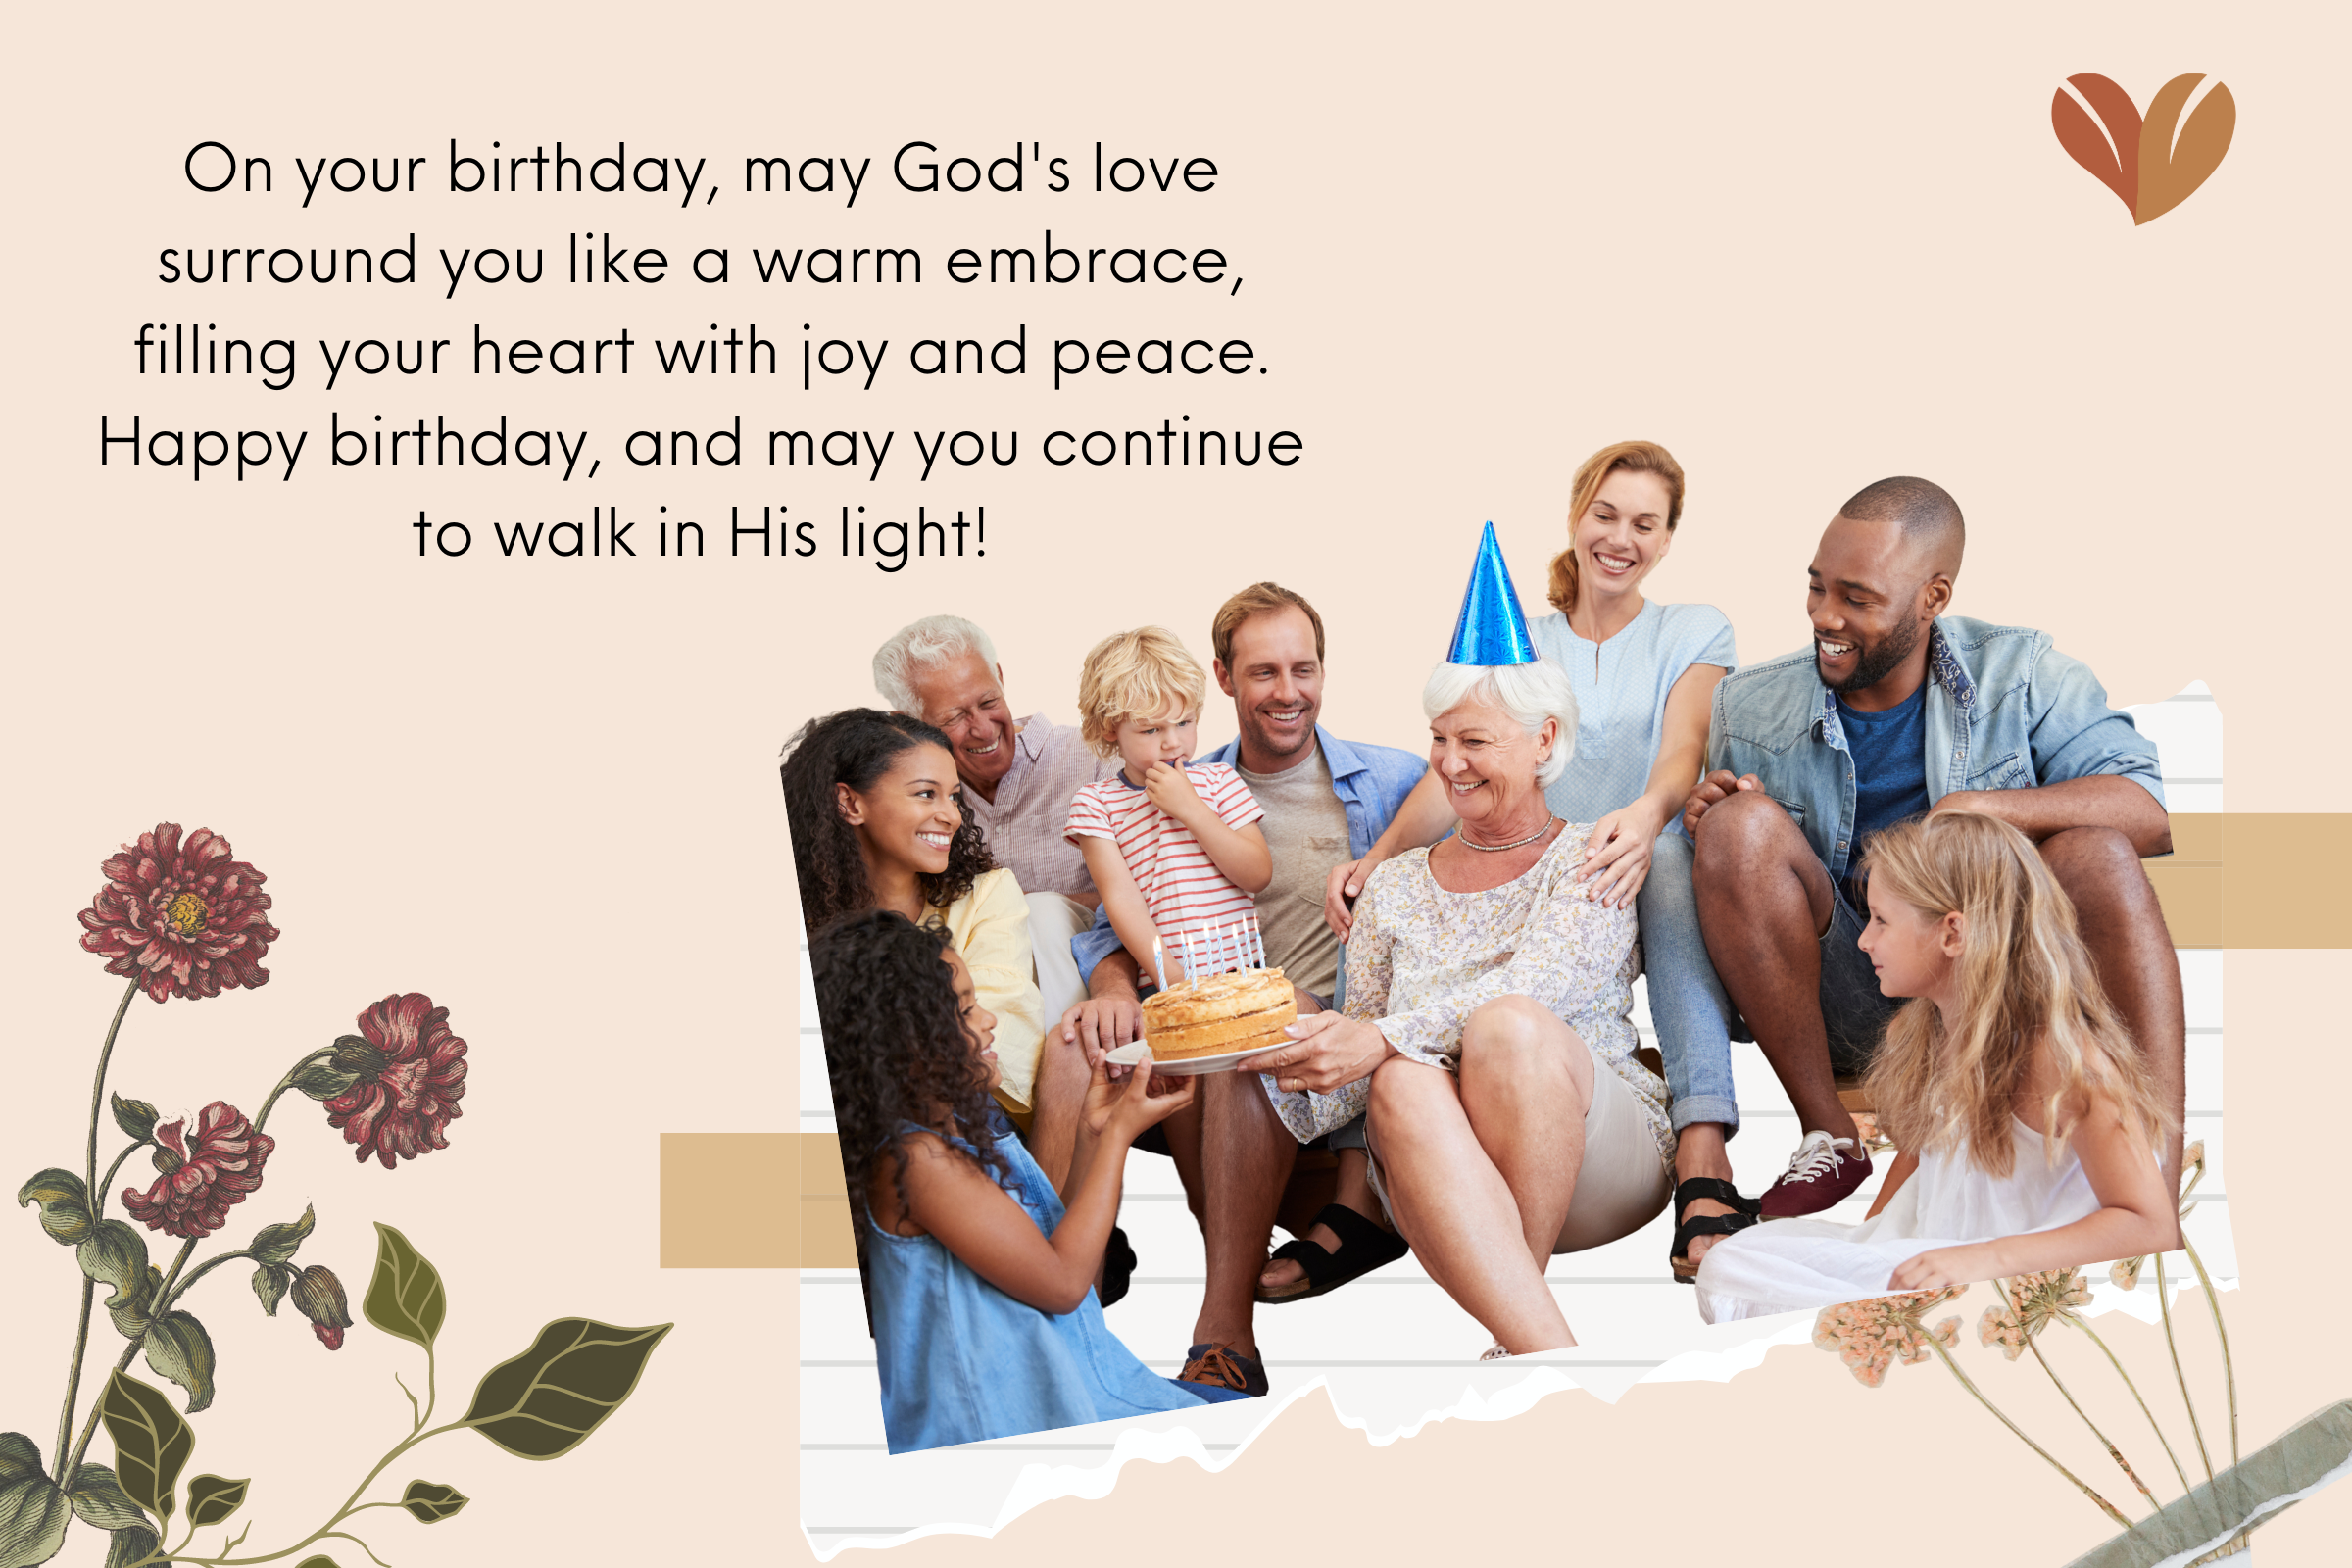 130+ Christian, Godly Birthday Wishes and Bible Verses